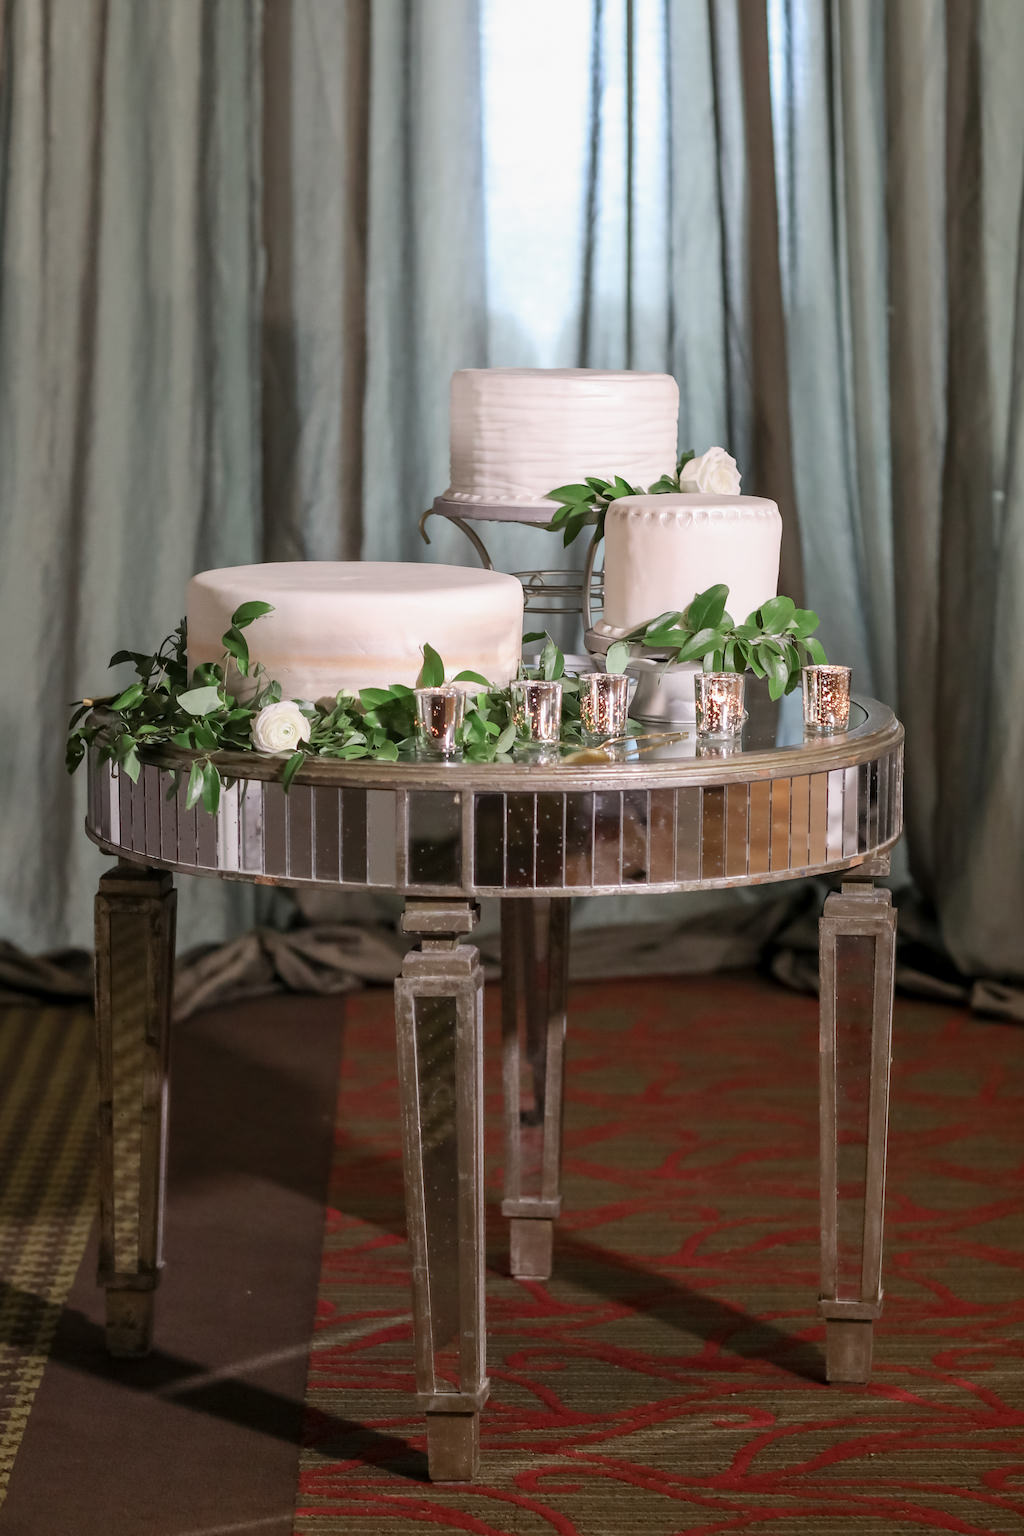 Deconstructed Three One Tier White Wedding Cakes on Various Cake Stands with Greenery and White Roses on Mirror Round Table and Silver Votives | Tampa Bay Photographer Lifelong Photography Studios | Planner Parties A'la Carte | Wedding Cake Alessi Bakeries | Rentals A Chair Affair | Florist Cotton and Magnolia